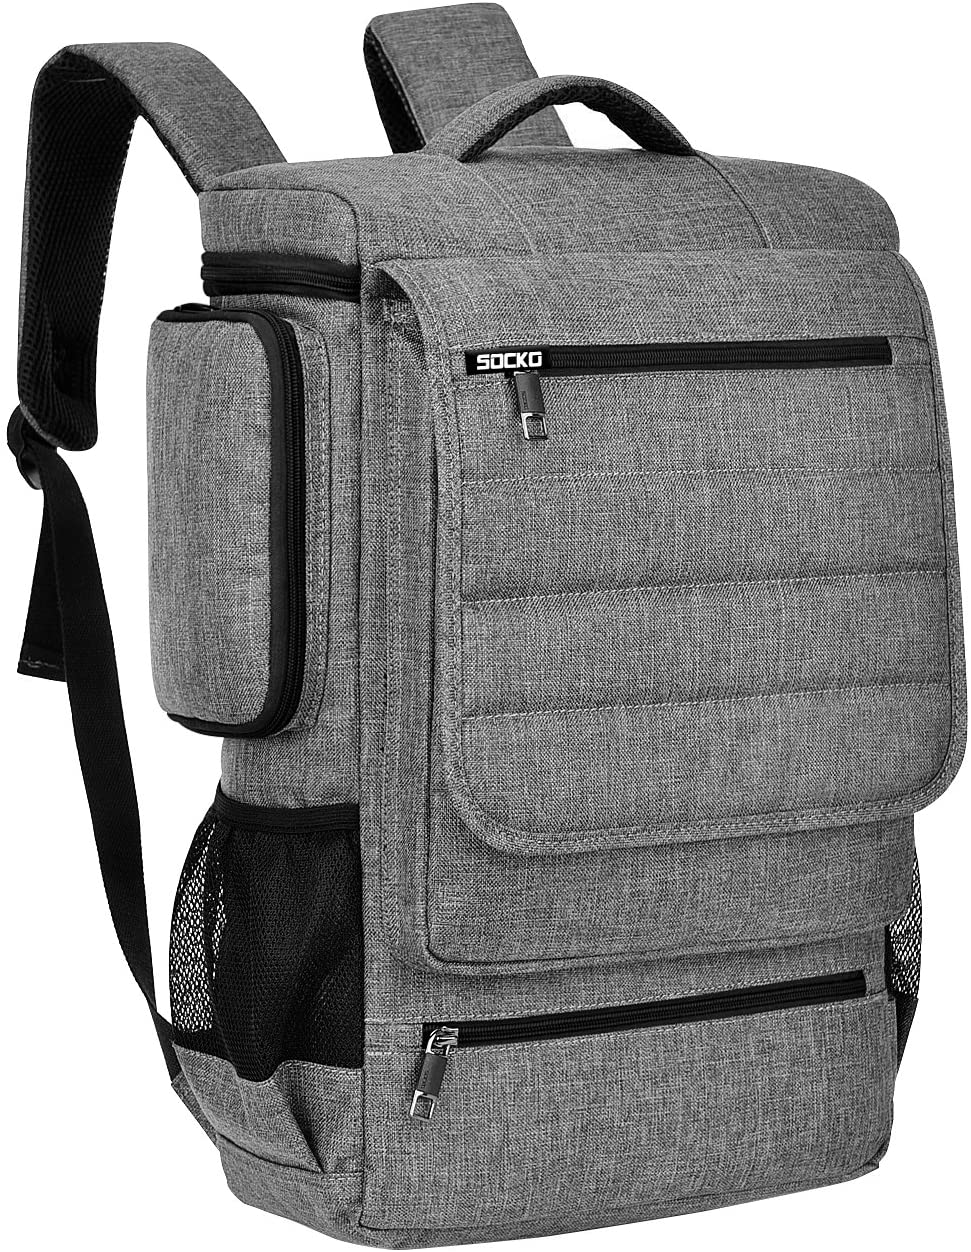 15.6~17.3 Inch Laptop Backpack Canvas Nylon Travel School Computer Bag for Dell 